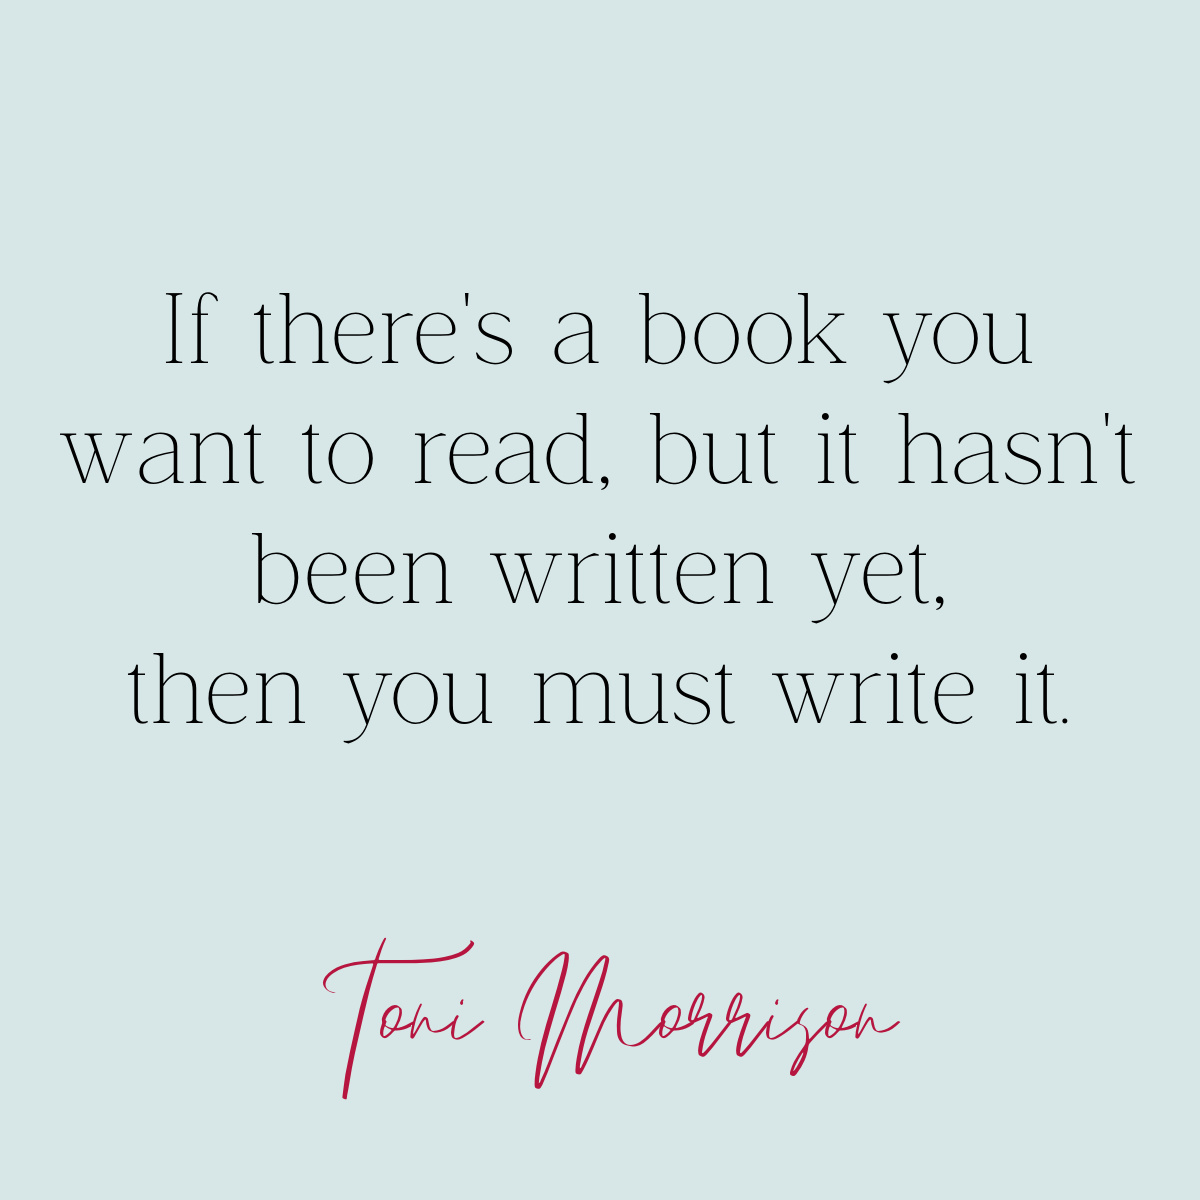 quote by Toni Morrison